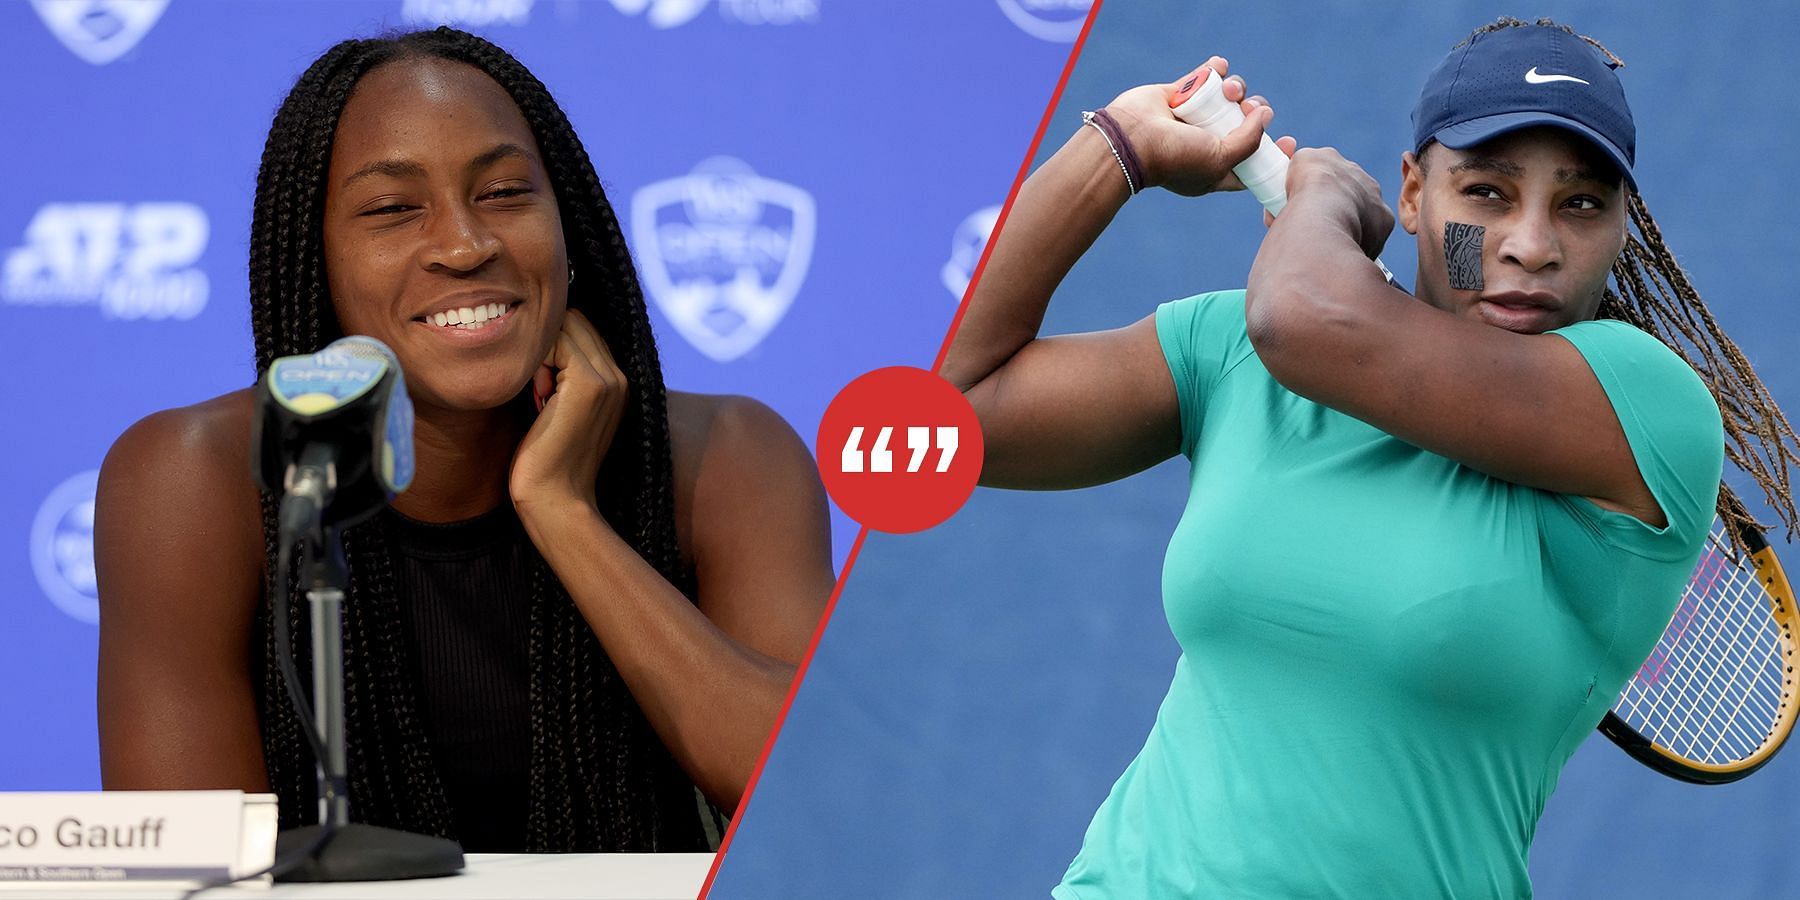 Coco Gauff lauded Serena Williams for her doubles record